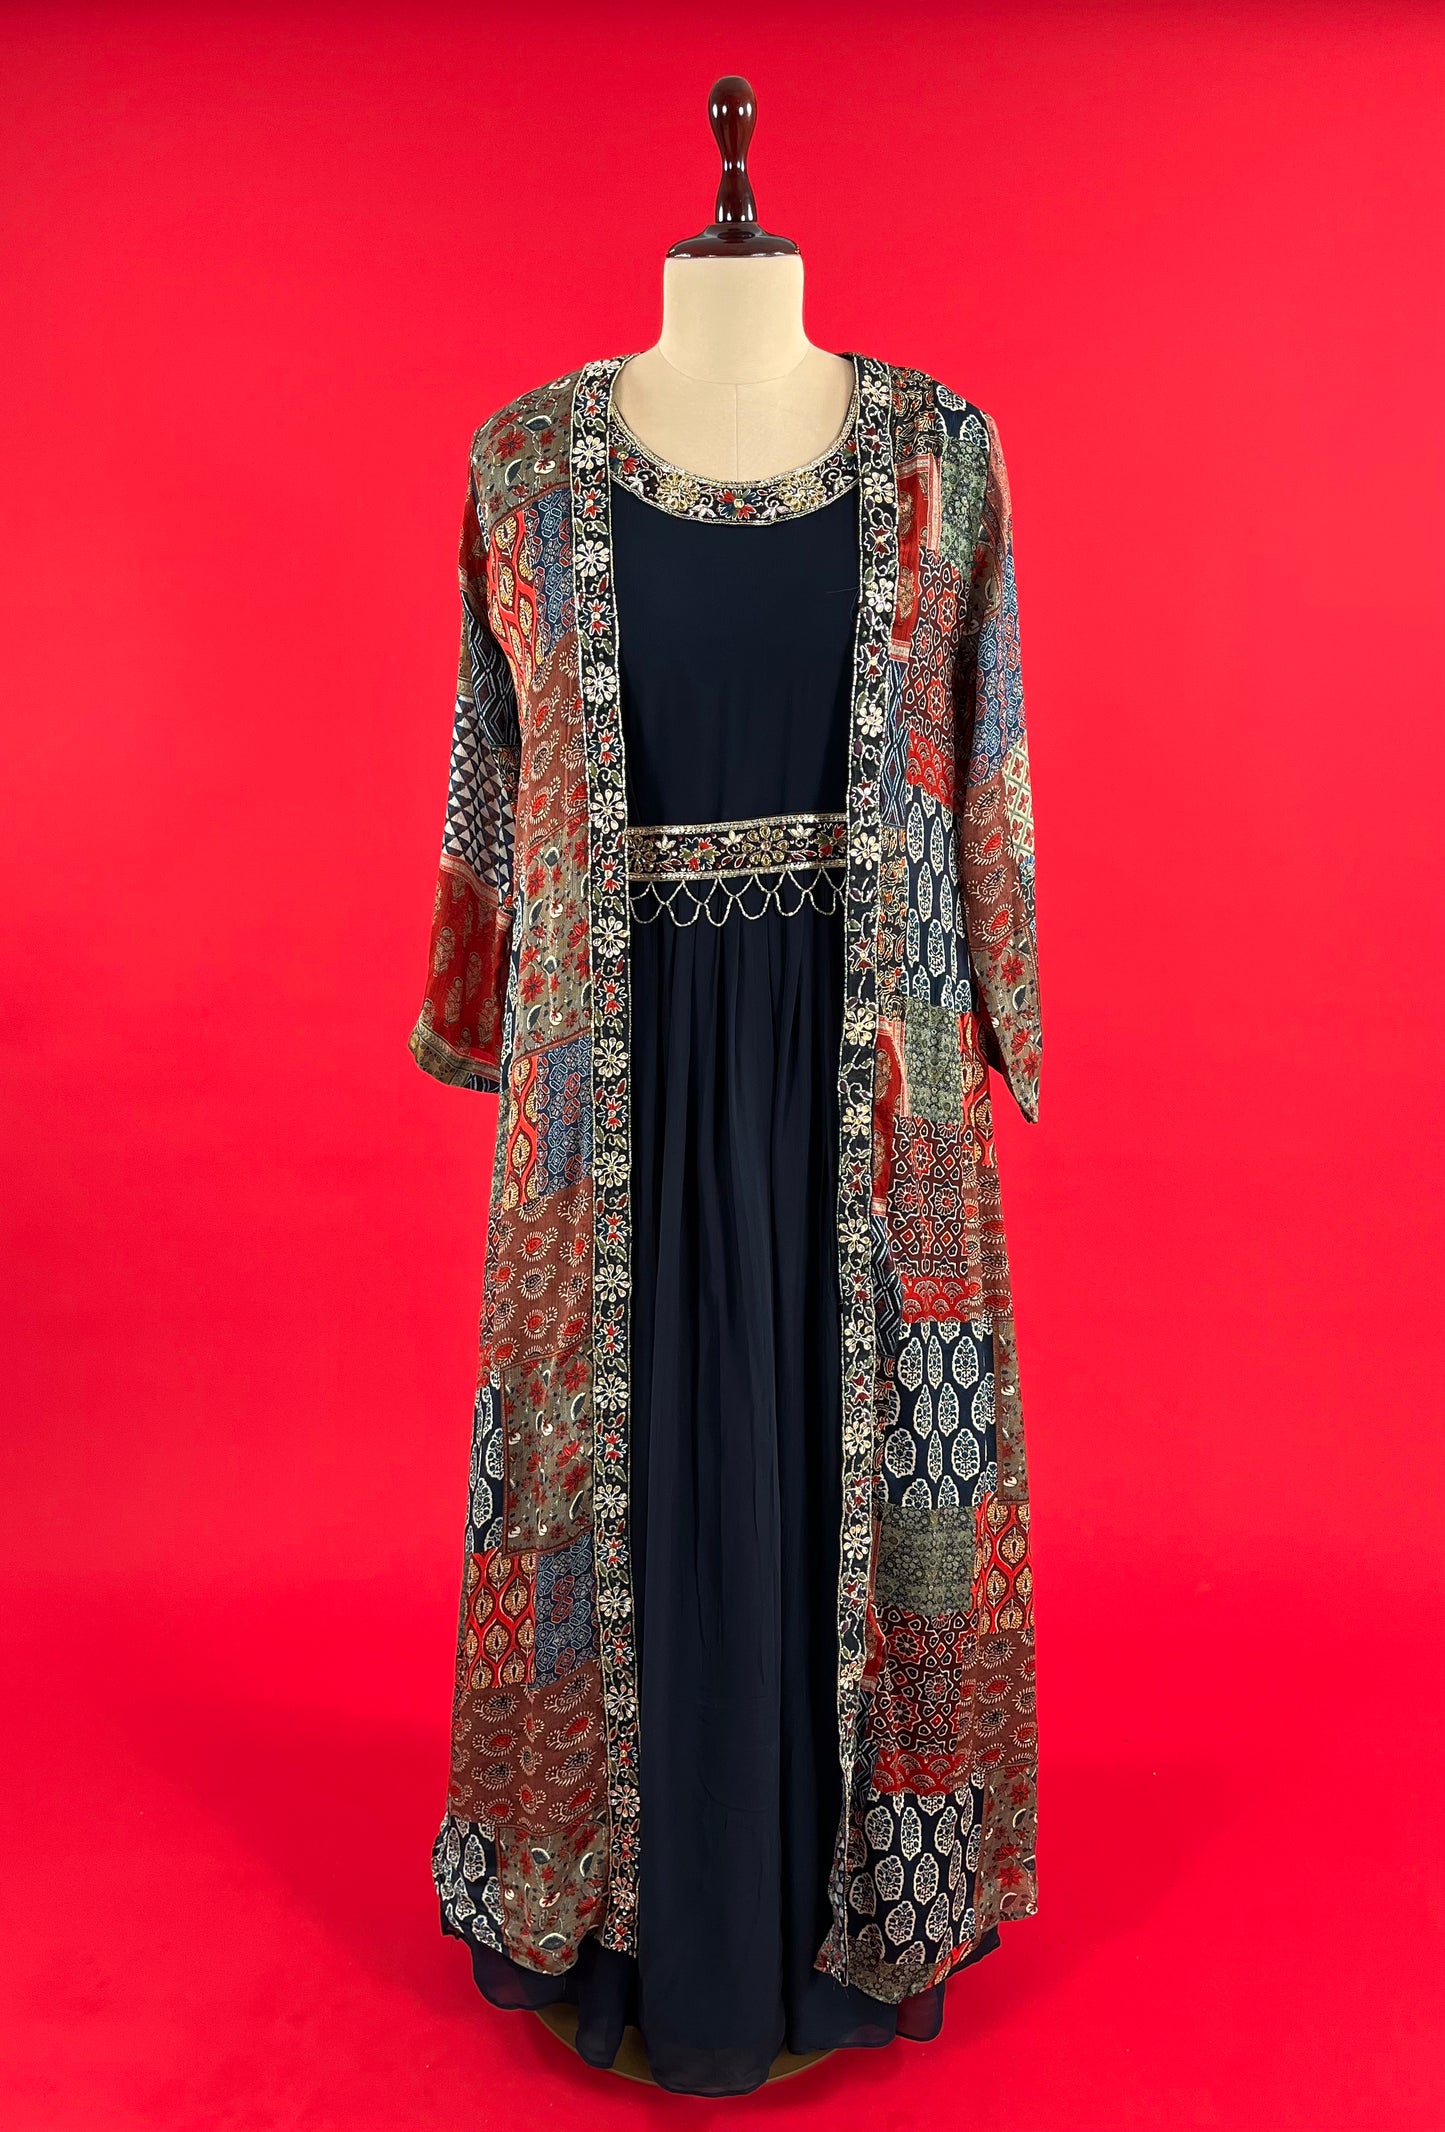 BLACK COLOUR GEORGETTE GOWN WITH LONG PRINTED SHRUG EMBELLISHED WITH CUTDANA WORK